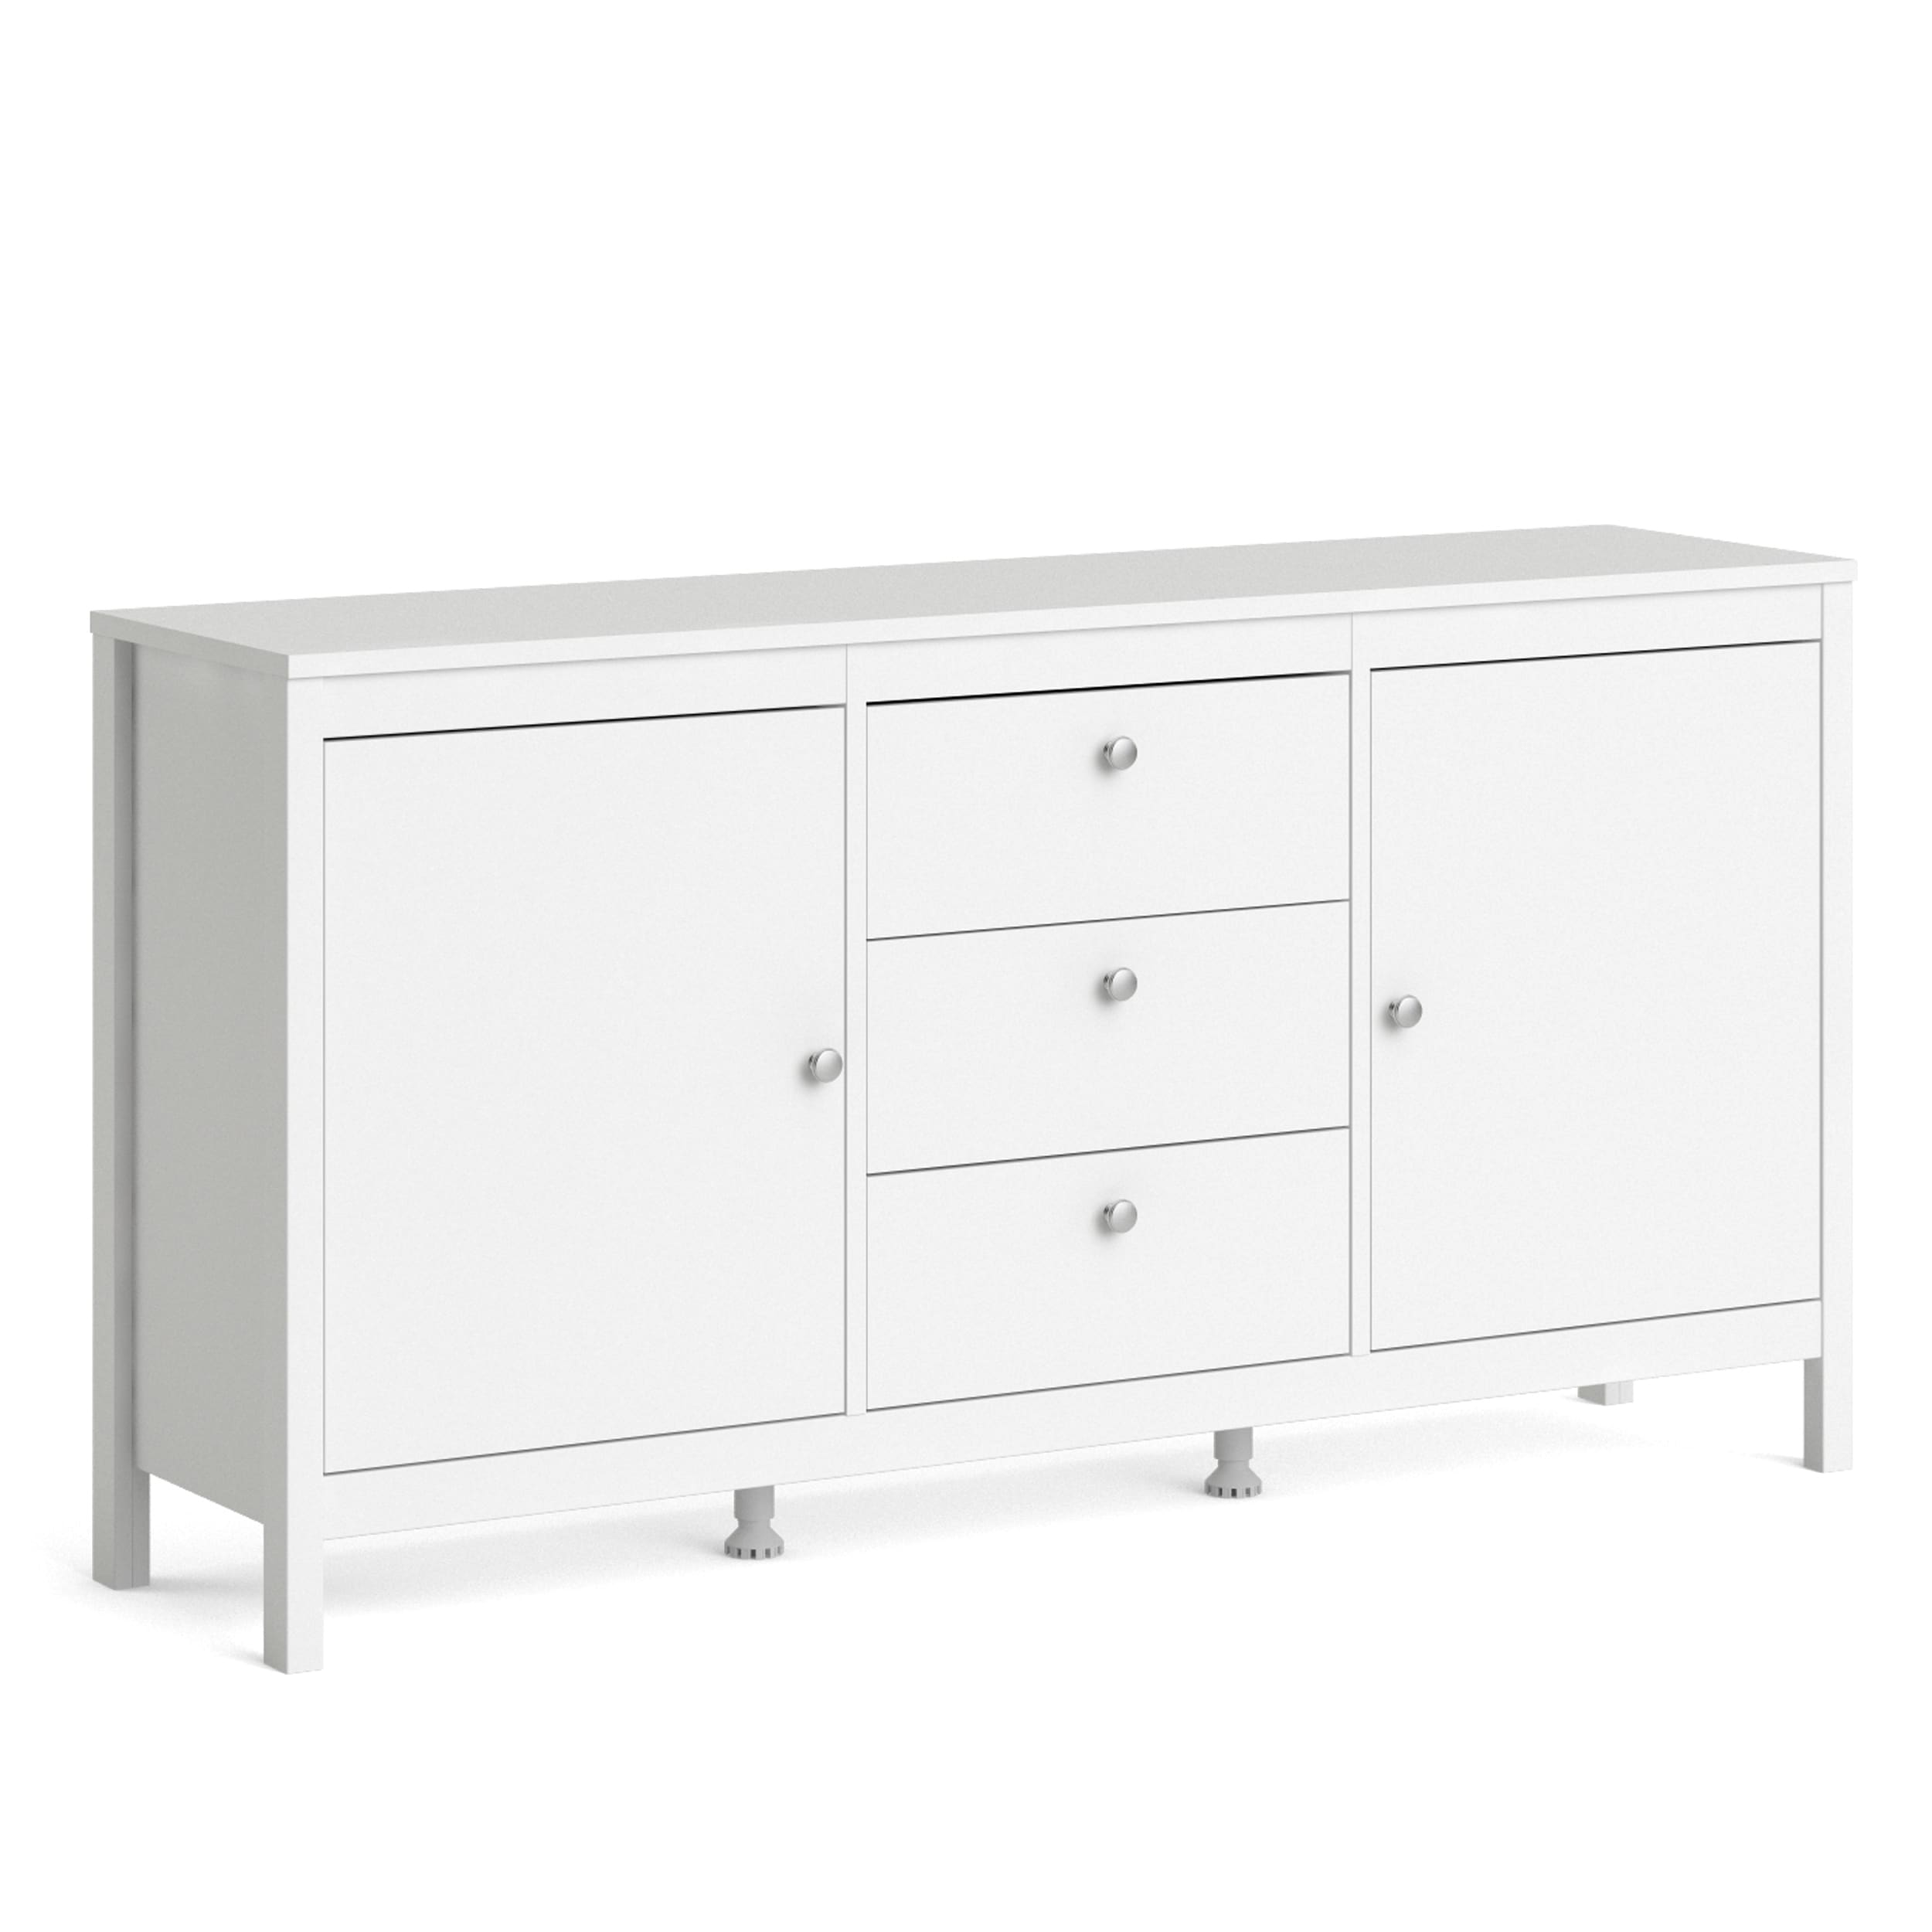 Bath 3-Drawers 2-Door - & Porch Beyond - 33673465 Sale Bed Sideboard & Madrid On Den with -